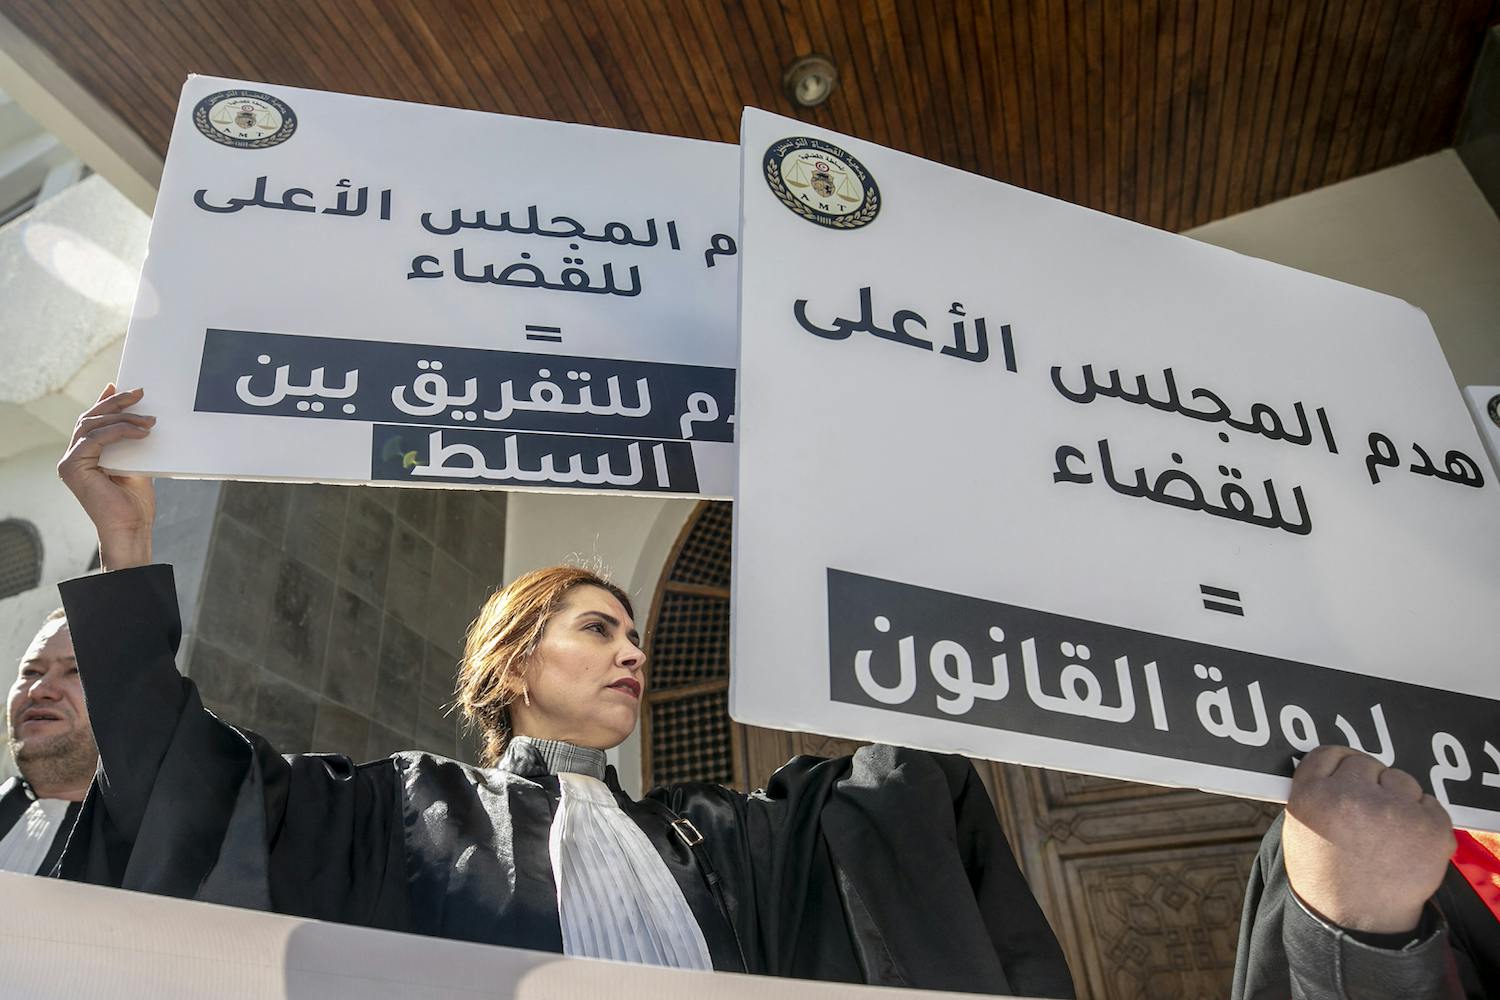 Members of the judiciary protest in Tunisia after the government arbitrarily dismissed 57 judges.